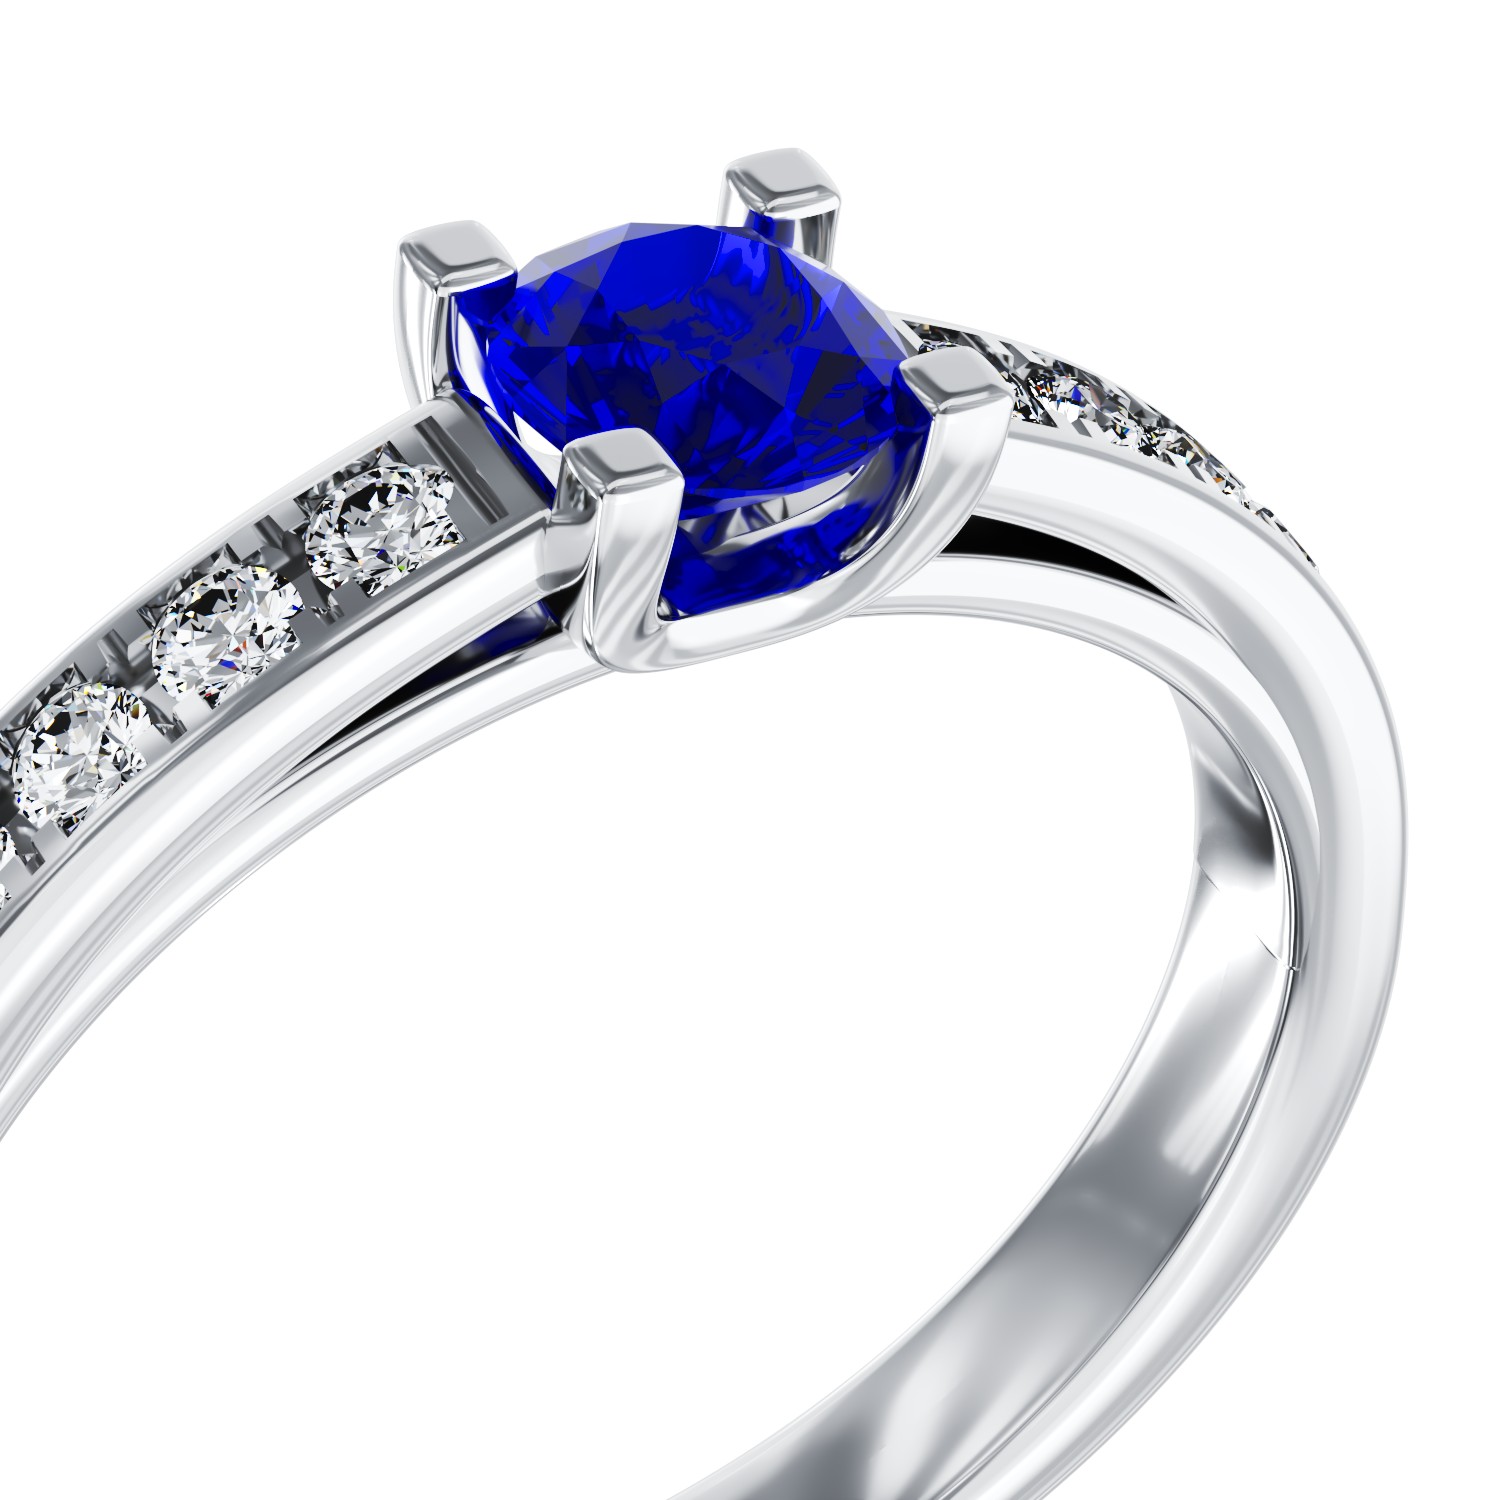 18K white gold engagement ring with 0.368ct sapphire and 0.134ct diamonds